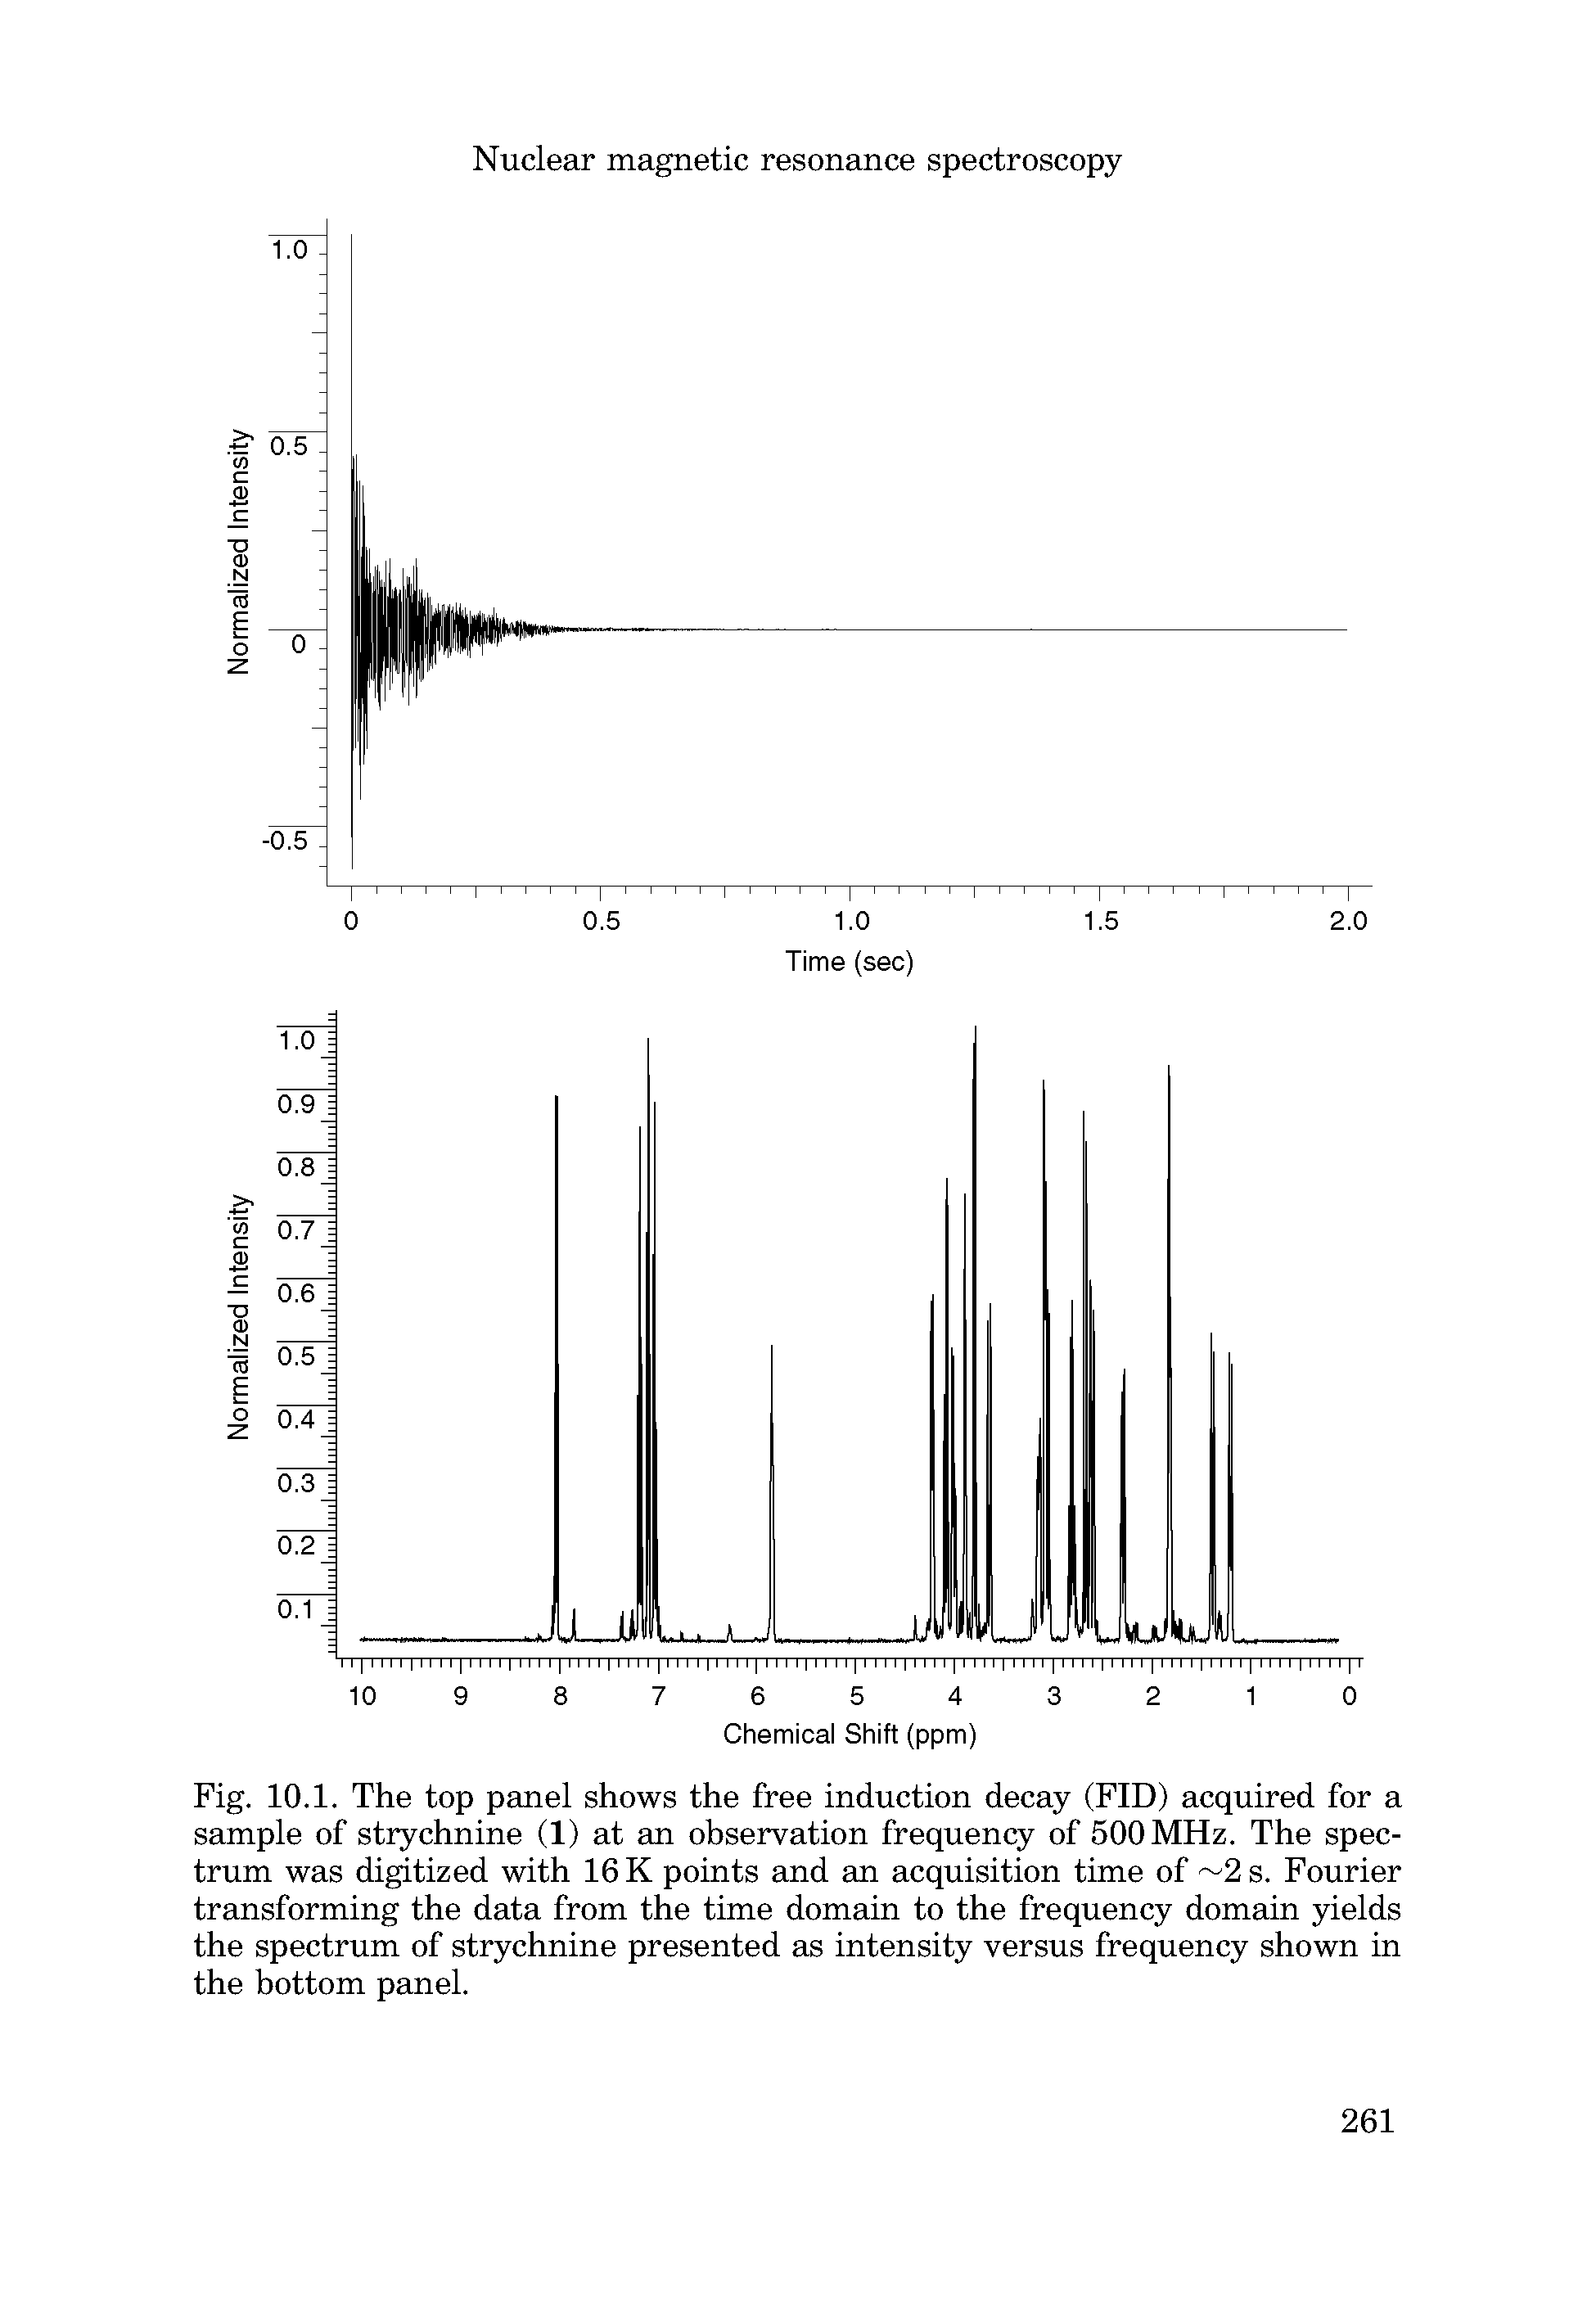 Fig. 10.1. The top panel shows the free induction decay (FID) acquired for a sample of strychnine (1) at an observation frequency of 500 MHz. The spectrum was digitized with 16 K points and an acquisition time of 2 s. Fourier transforming the data from the time domain to the frequency domain yields the spectrum of strychnine presented as intensity versus frequency shown in the bottom panel.